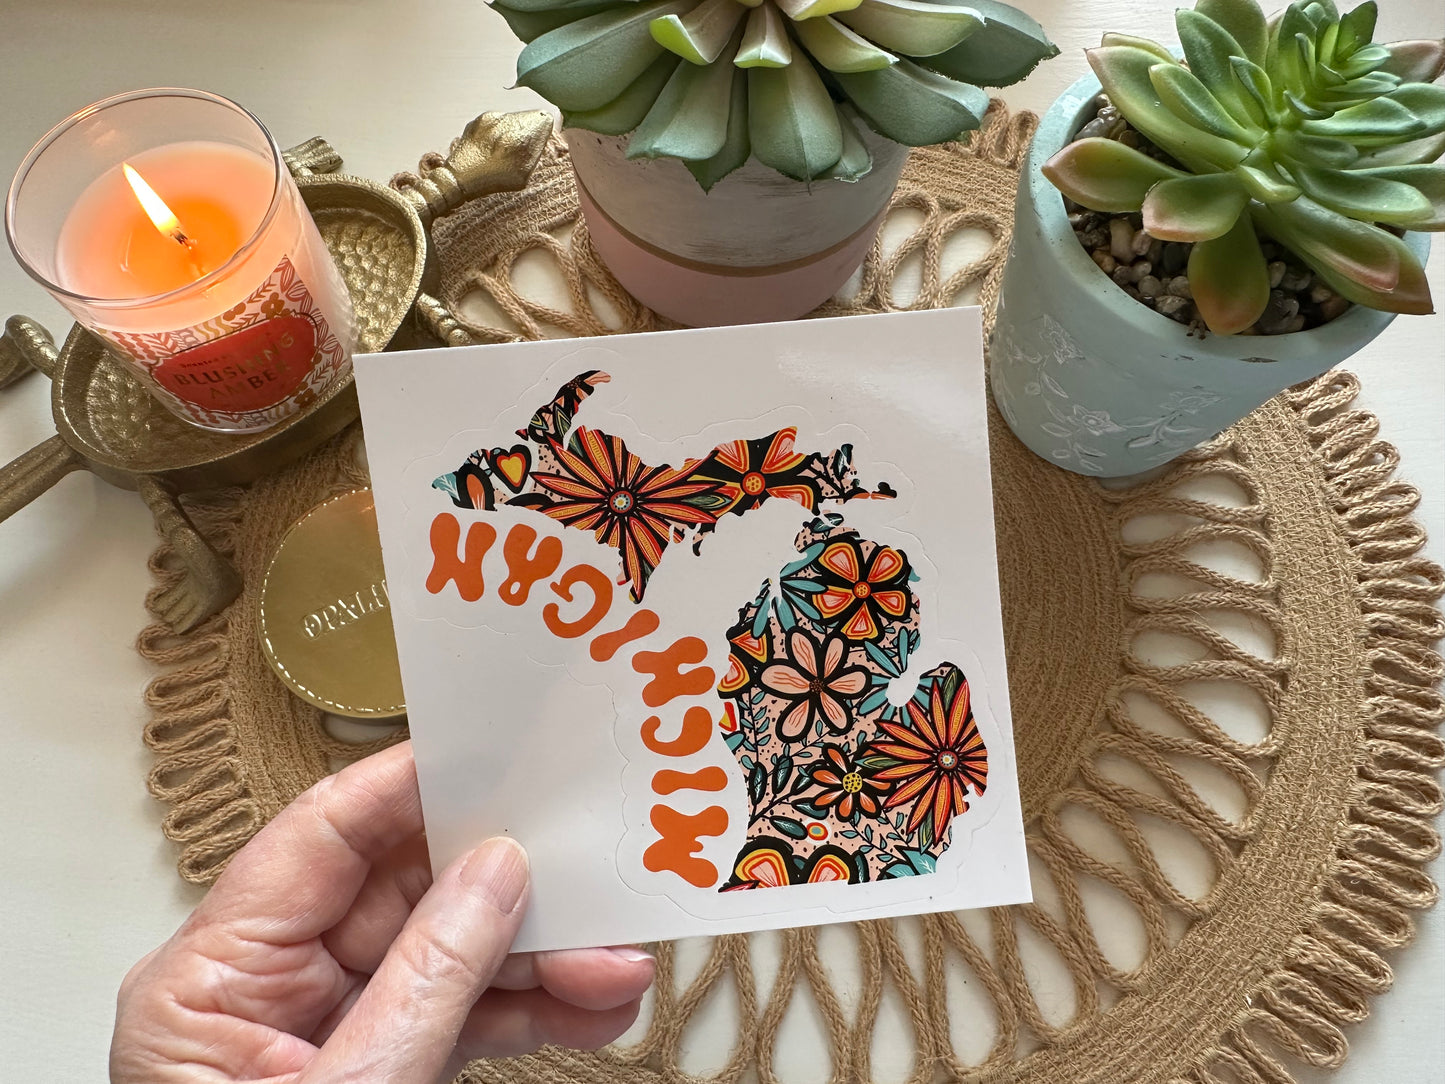 Michigan State Sticker | Vinyl Artist Designed Illustration Featuring Michigan State Outline Filled With Retro Flowers with Retro Hand-Lettering Die-Cut Stickers